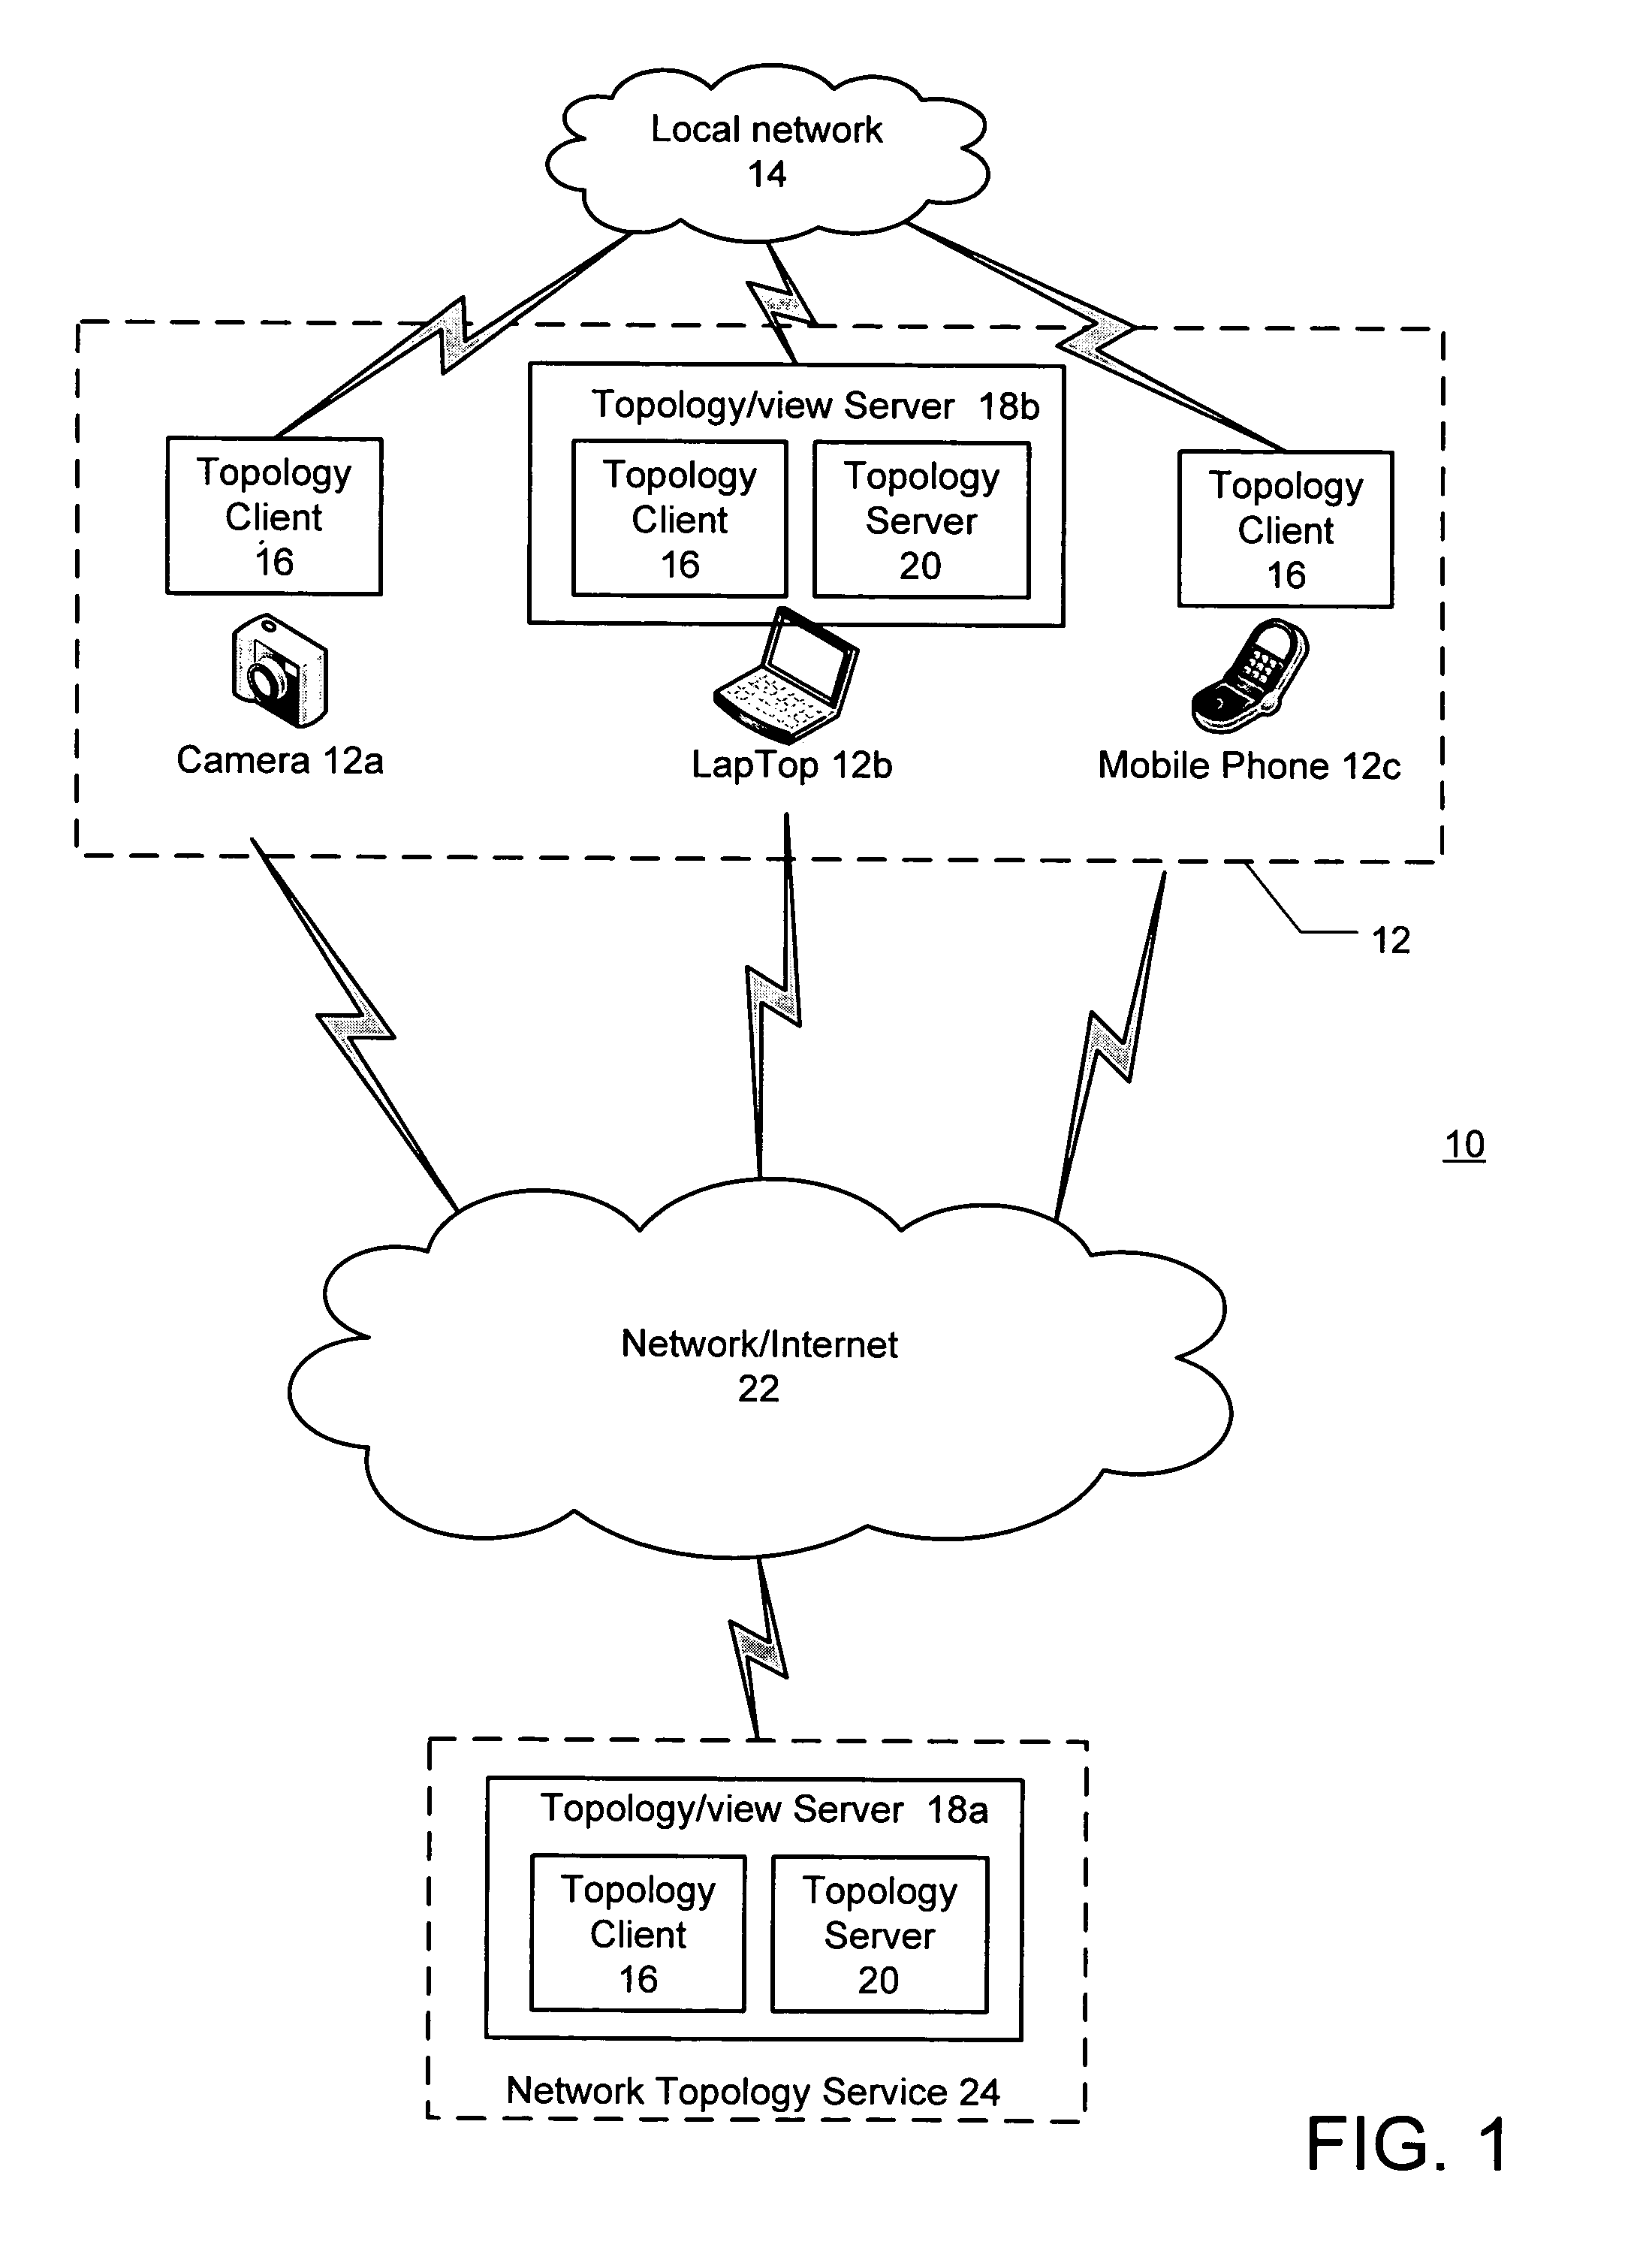 Processing operations associated with resources on a local network